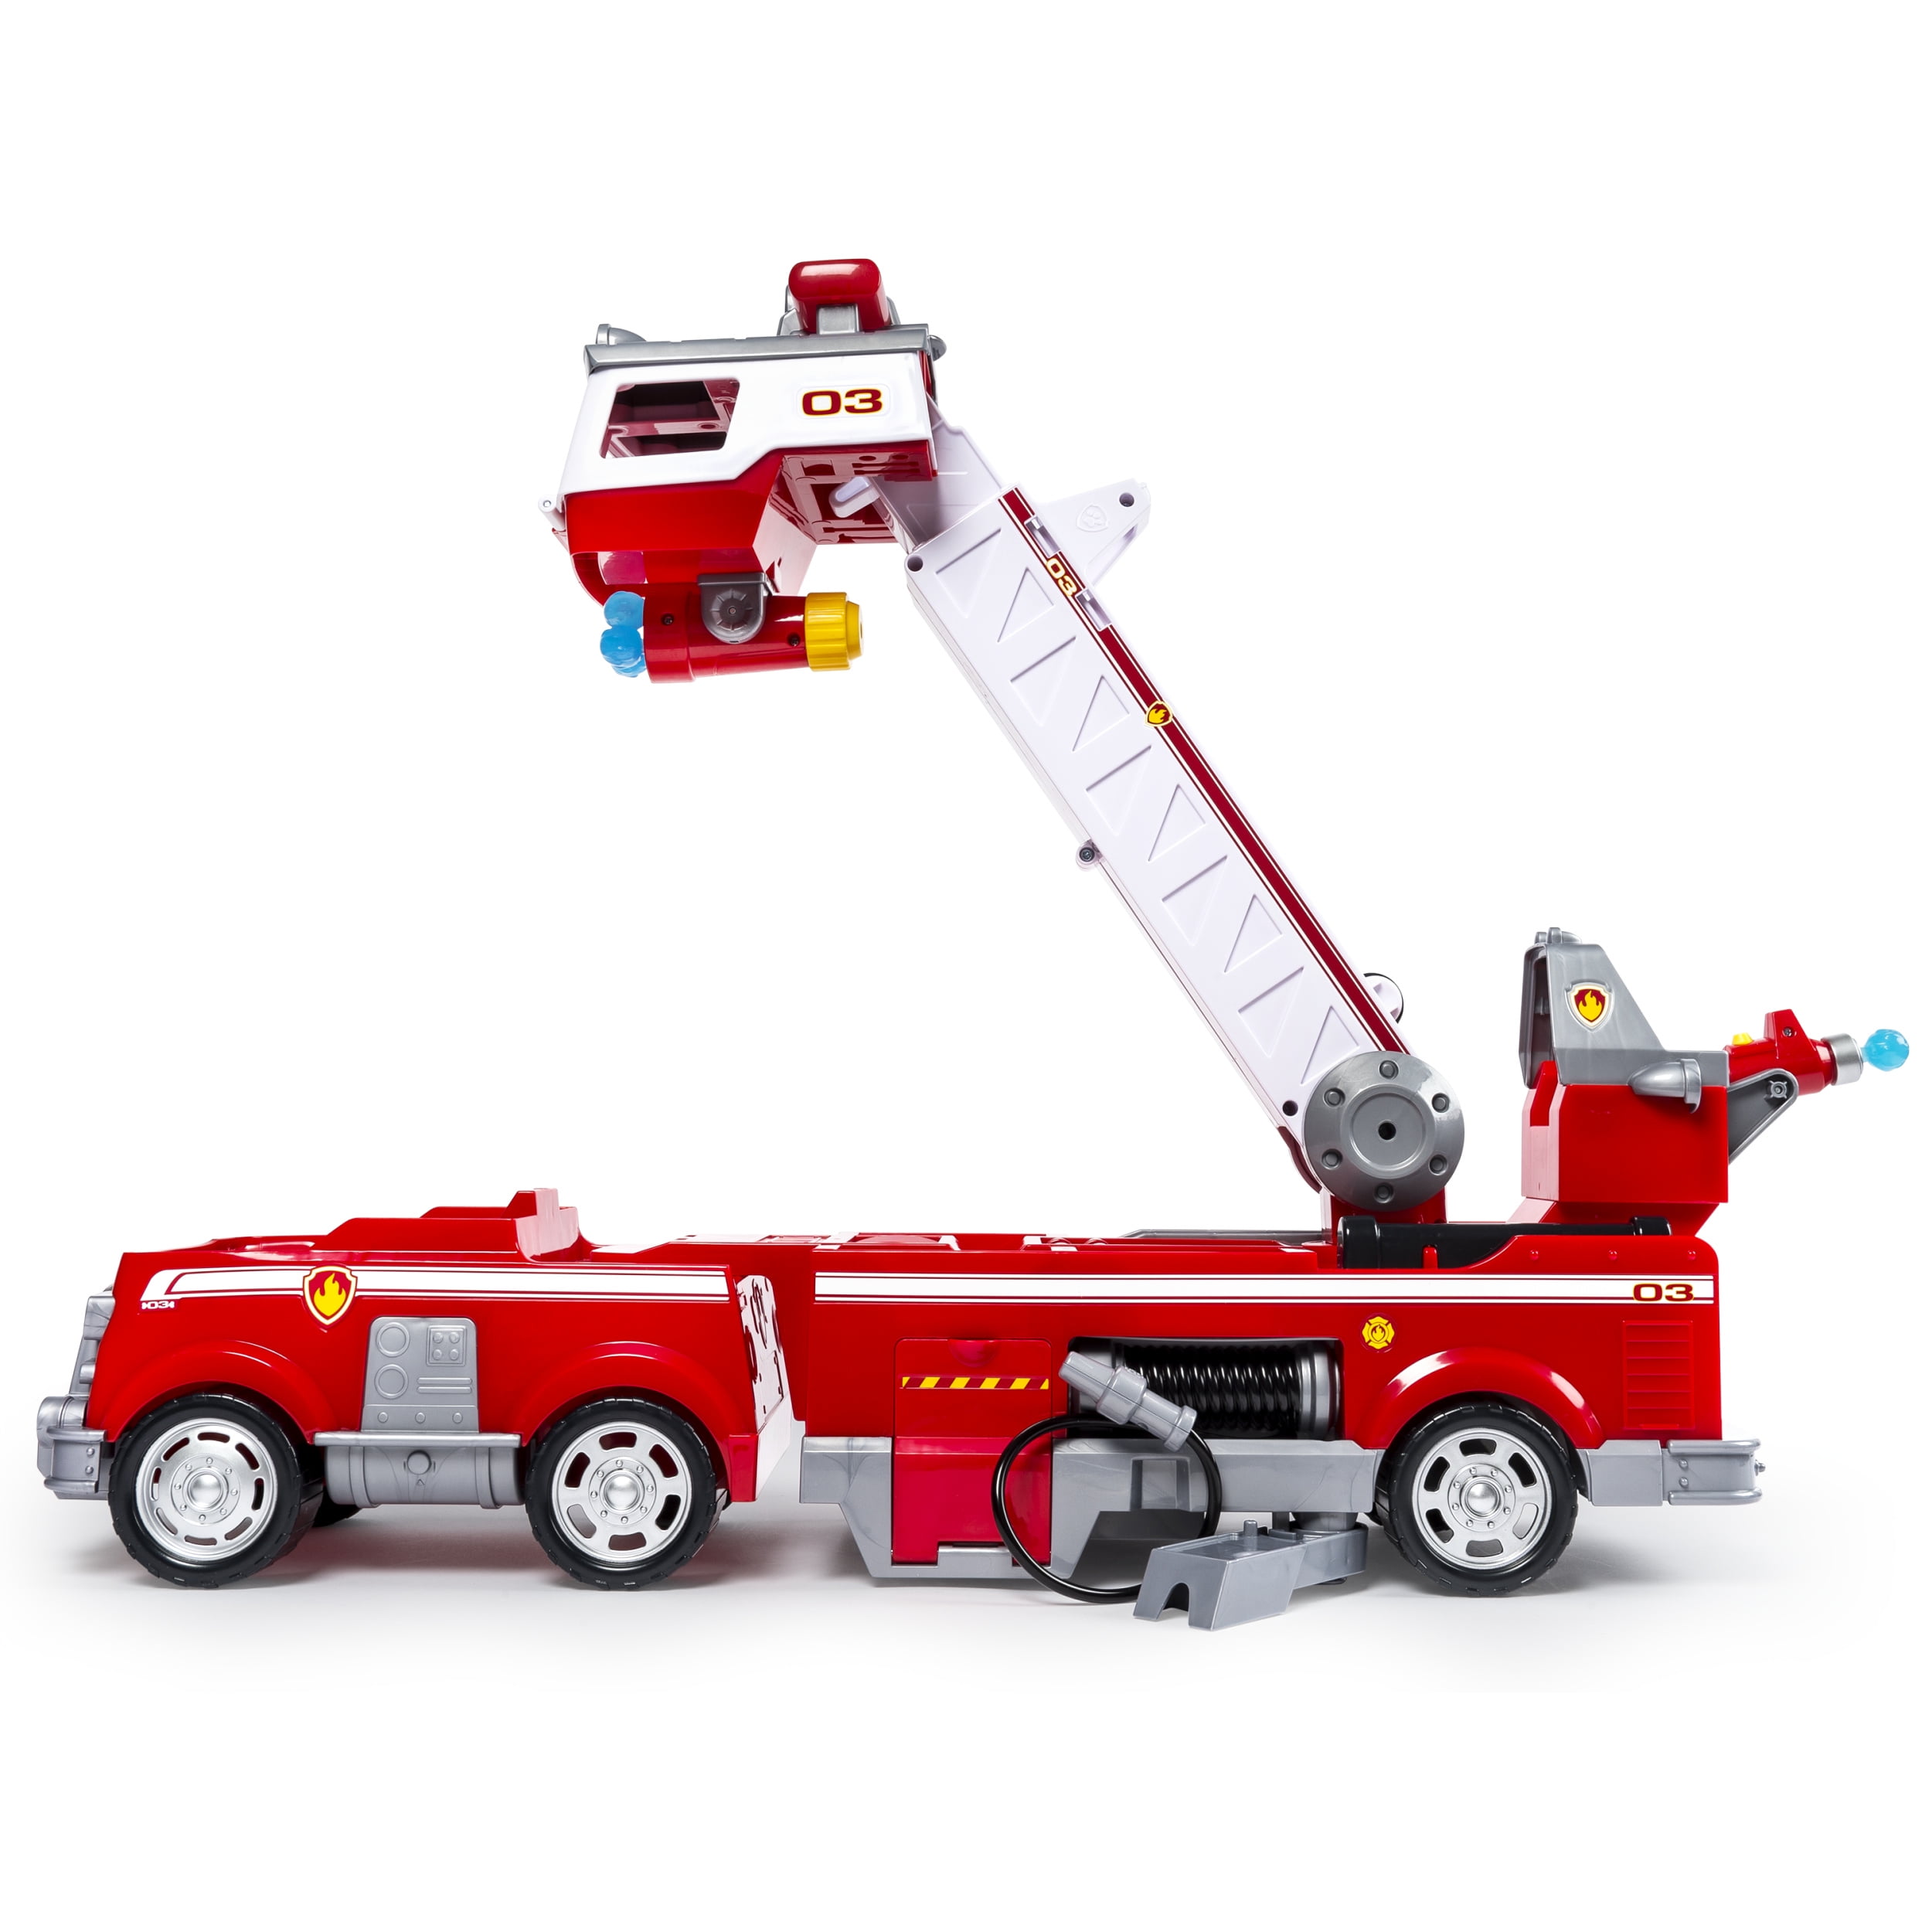 Toddlers Age 2,3,4,5, 6 in 1 Fire Engine Toy with Mini Fire Rescue Emergency Vehicles Fire Truck for Boys Best car carrier truck Play Set w// Station and Rescue Ladder |Toys Gifts for Boys /& Girls